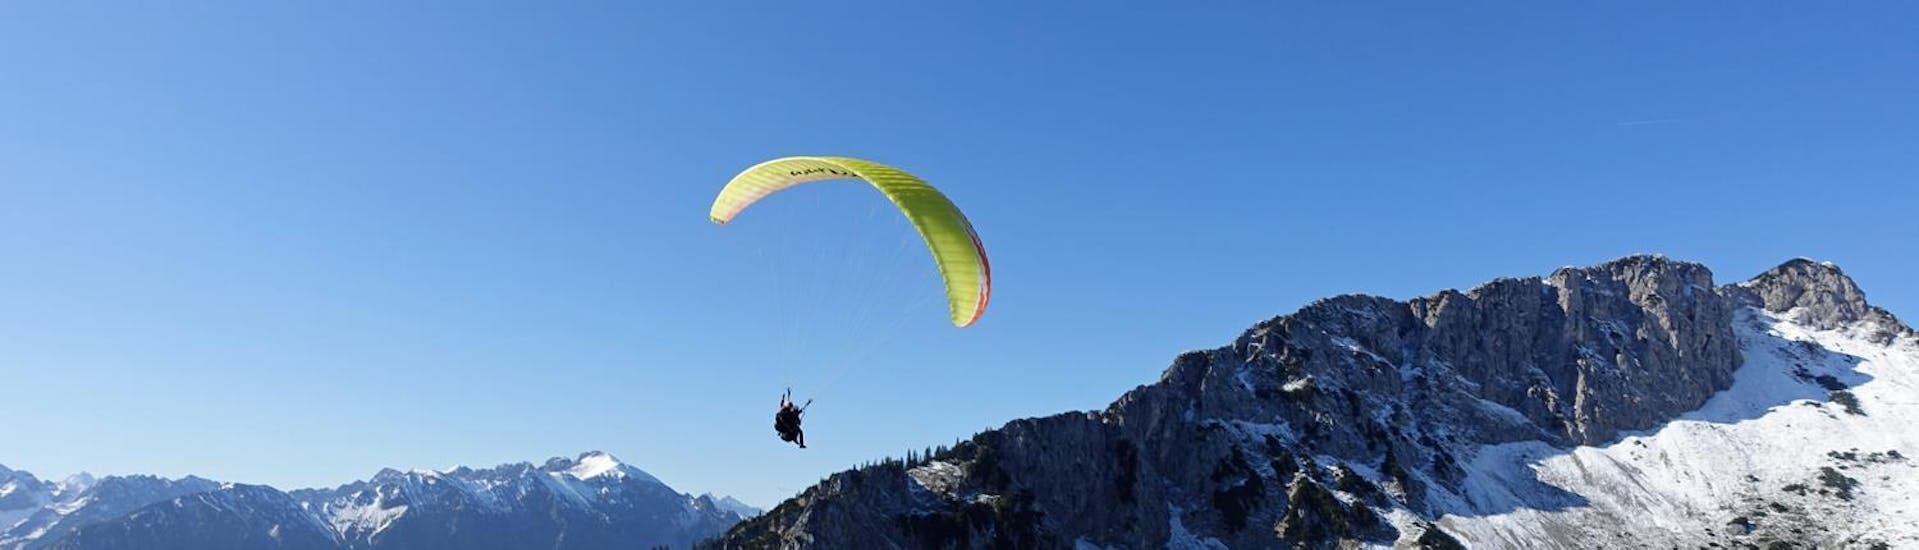 During the Tandem Paragliding "Long Distance Flight" in Allgäu and Tyrol, a paraglider from FlyTeam is soaring high above the mountains.